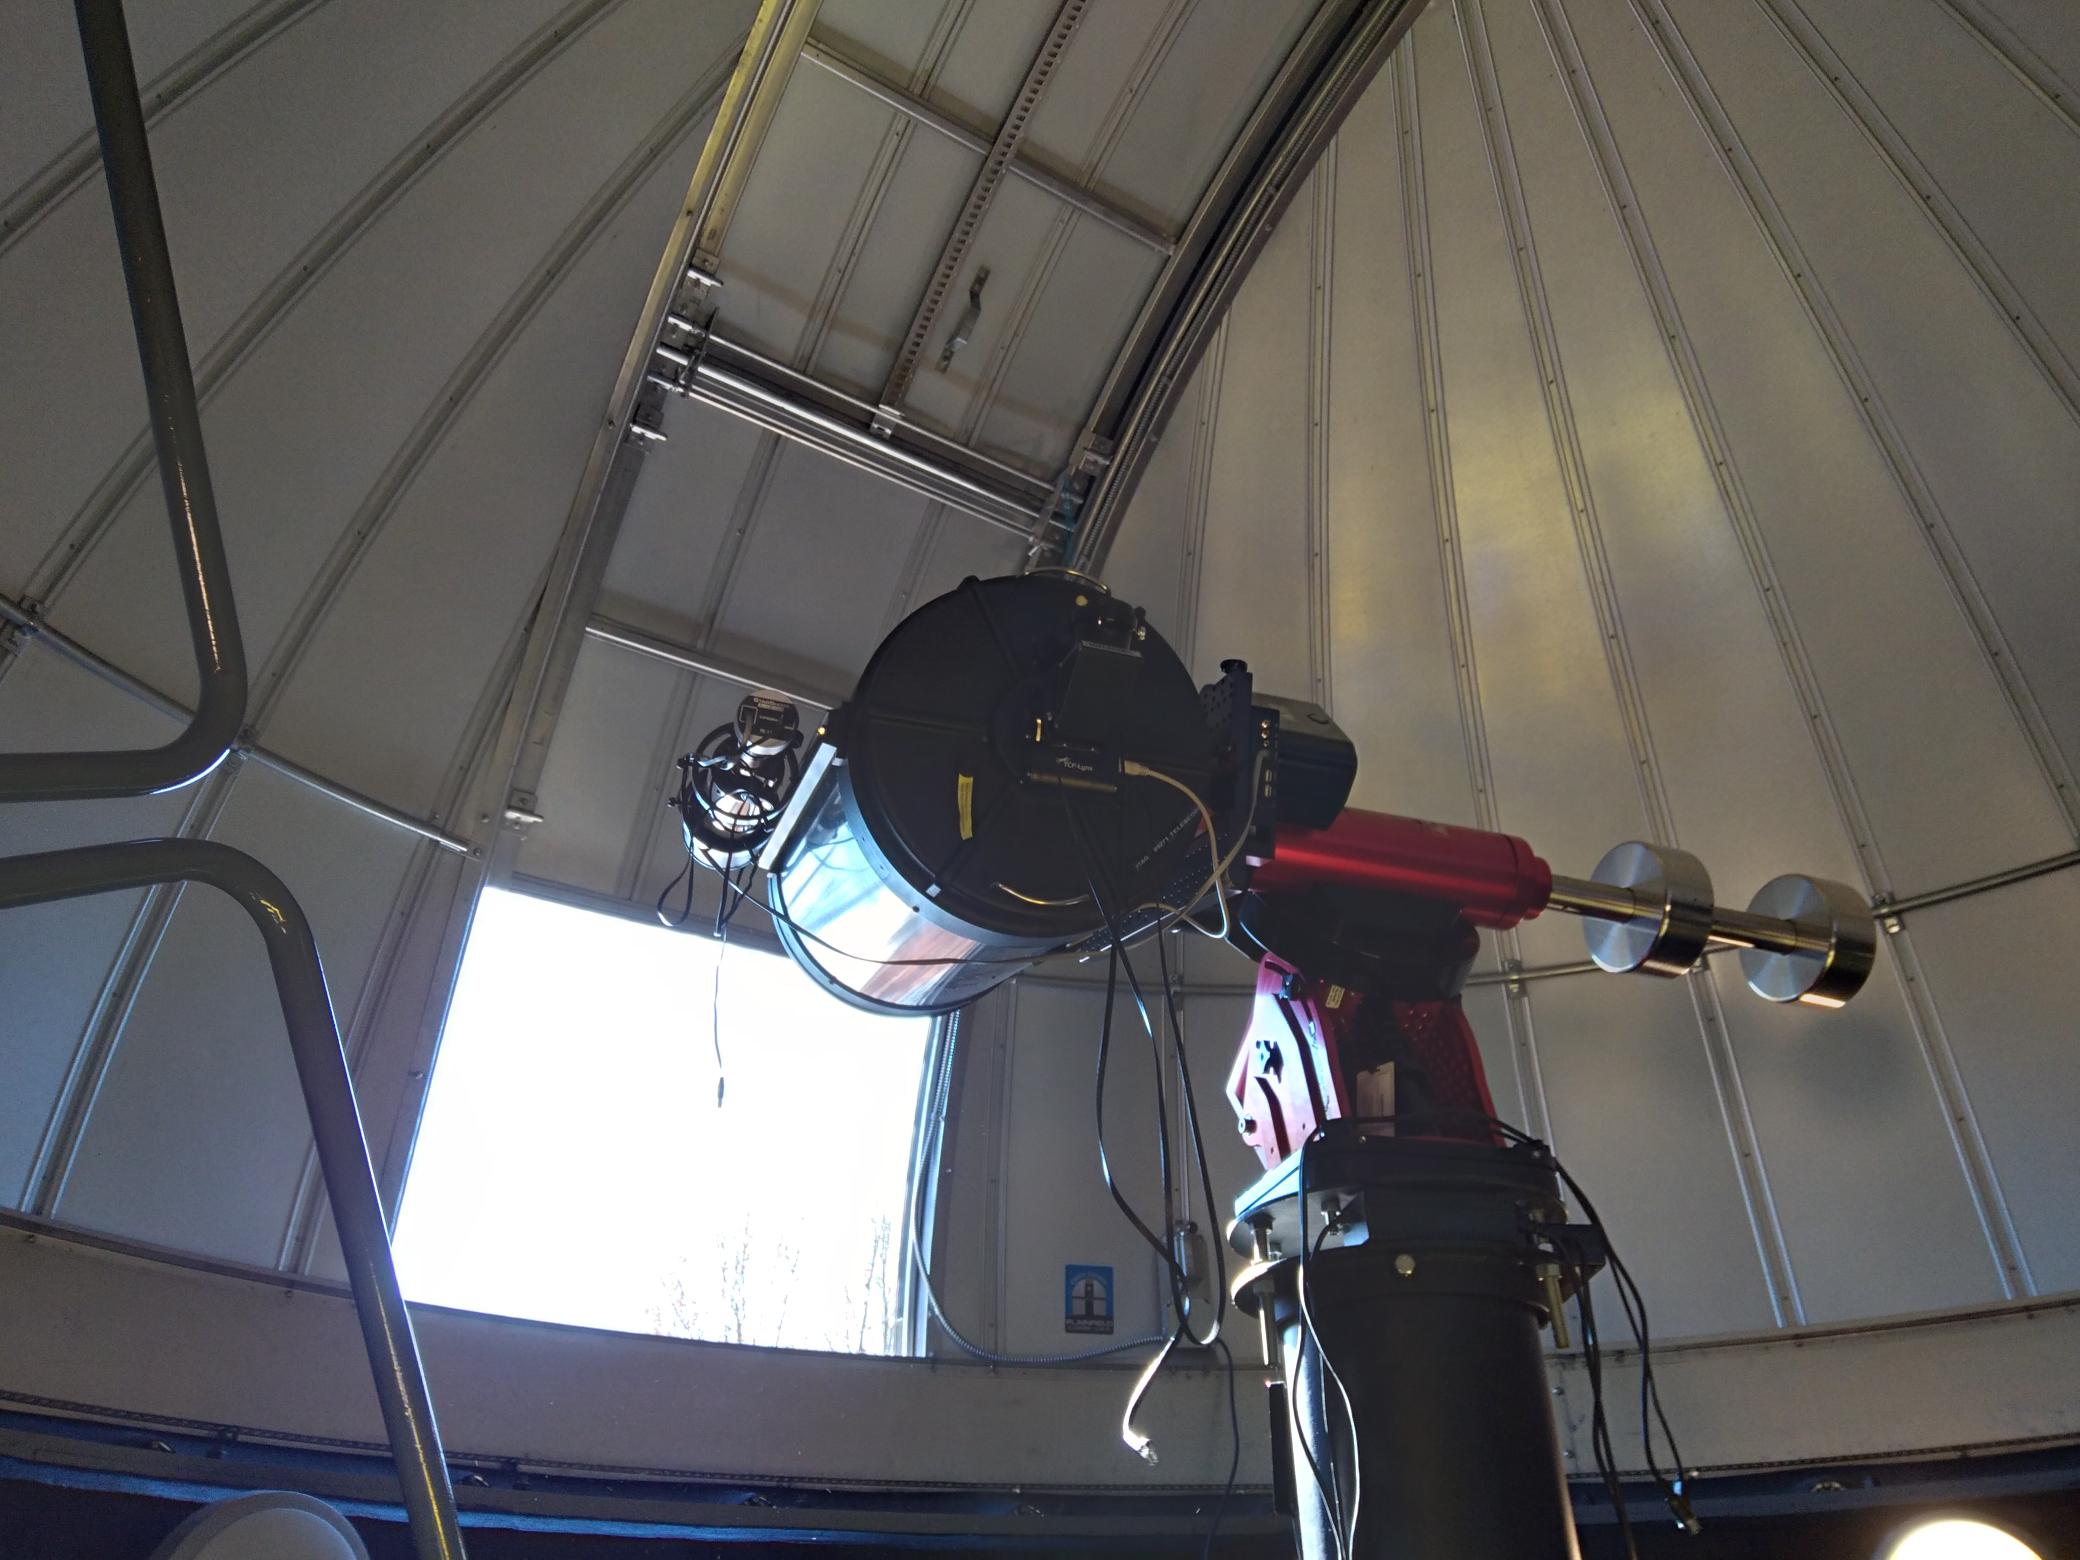 Research at the Observatory